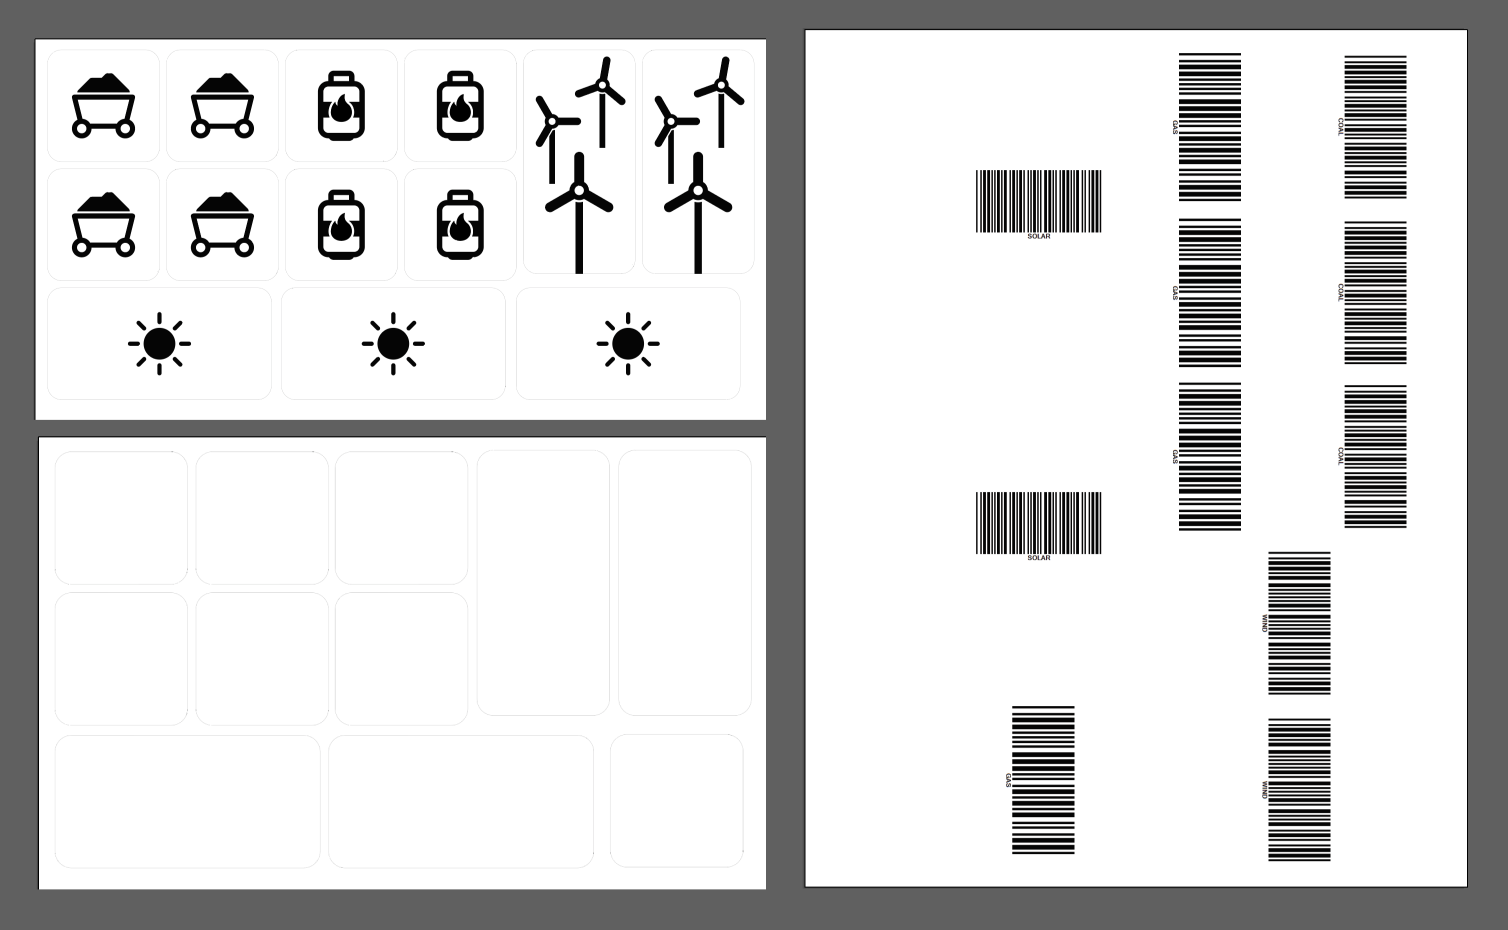 Barcodes and pieces laid out in Illustrator